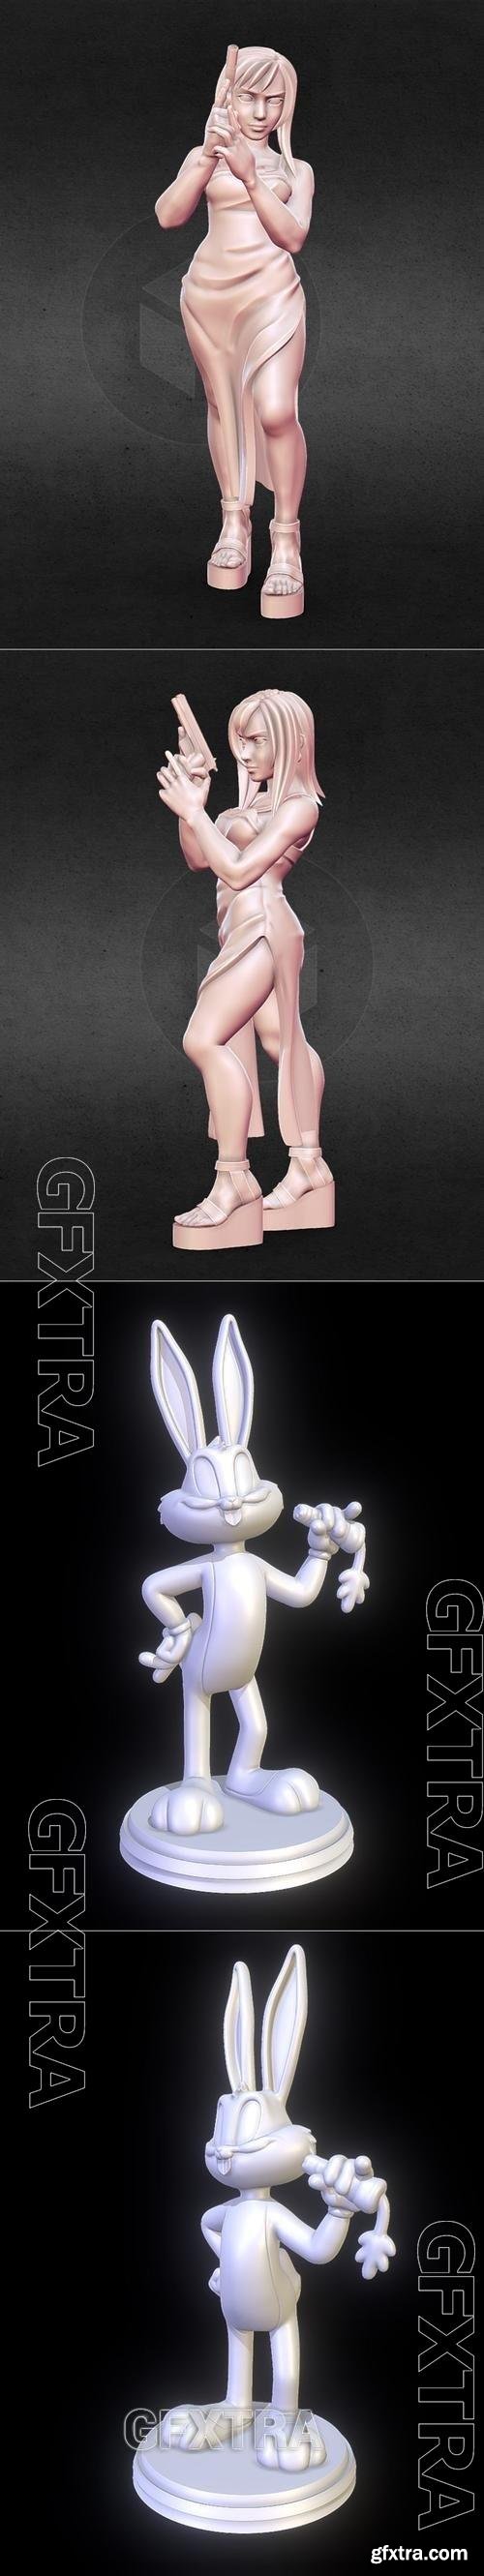 Aya Brea Parasite Eve and Bugs Bunny Looney Tunes 3D